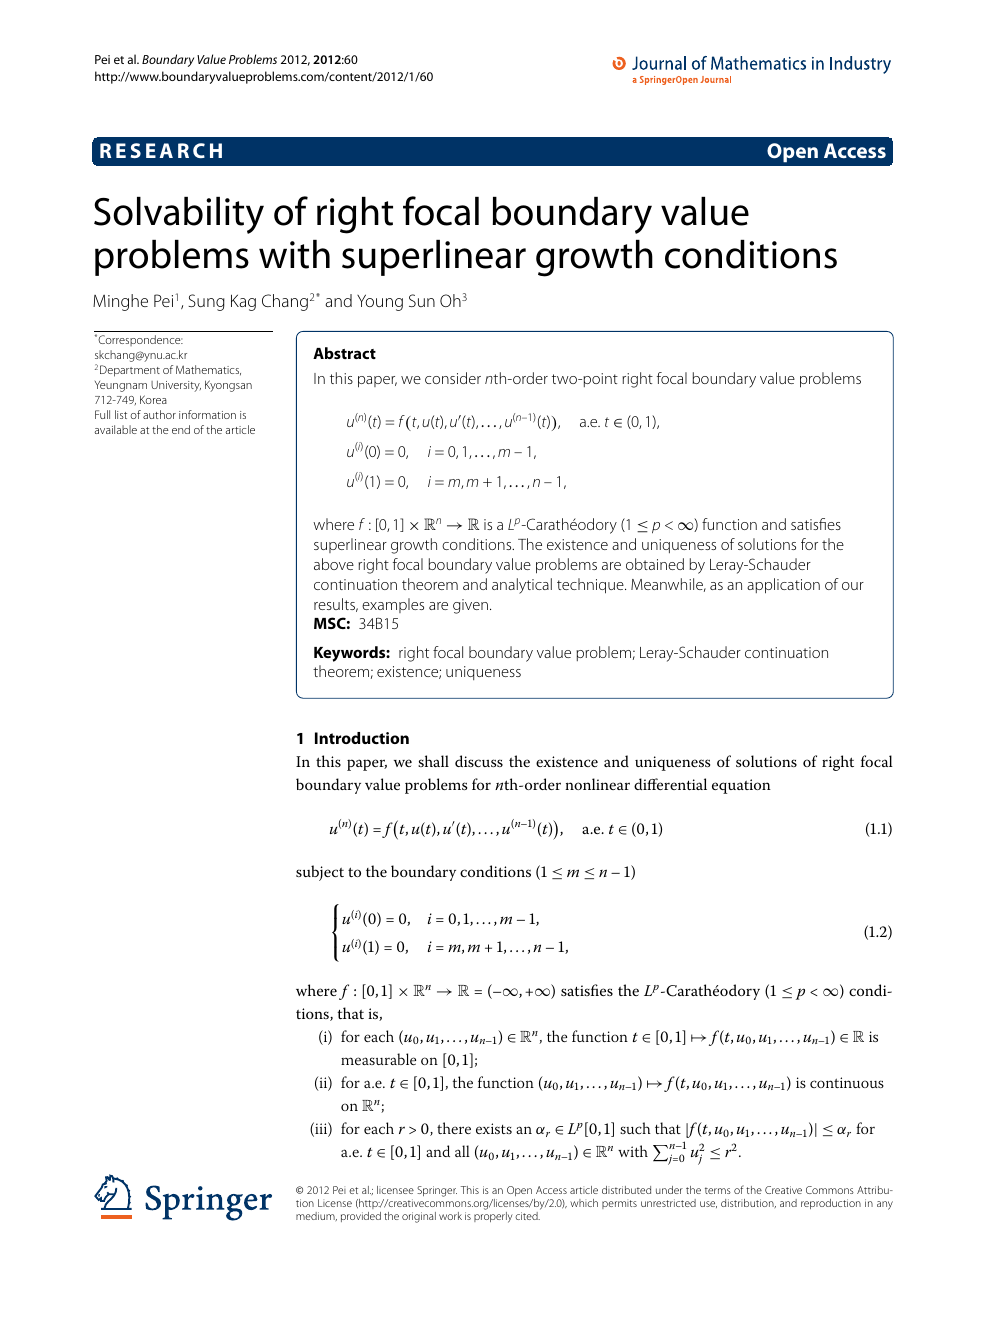 Solvability Of Right Focal Boundary Value Problems With Superlinear Growth Conditions Topic Of Research Paper In Mathematics Download Scholarly Article Pdf And Read For Free On Cyberleninka Open Science Hub